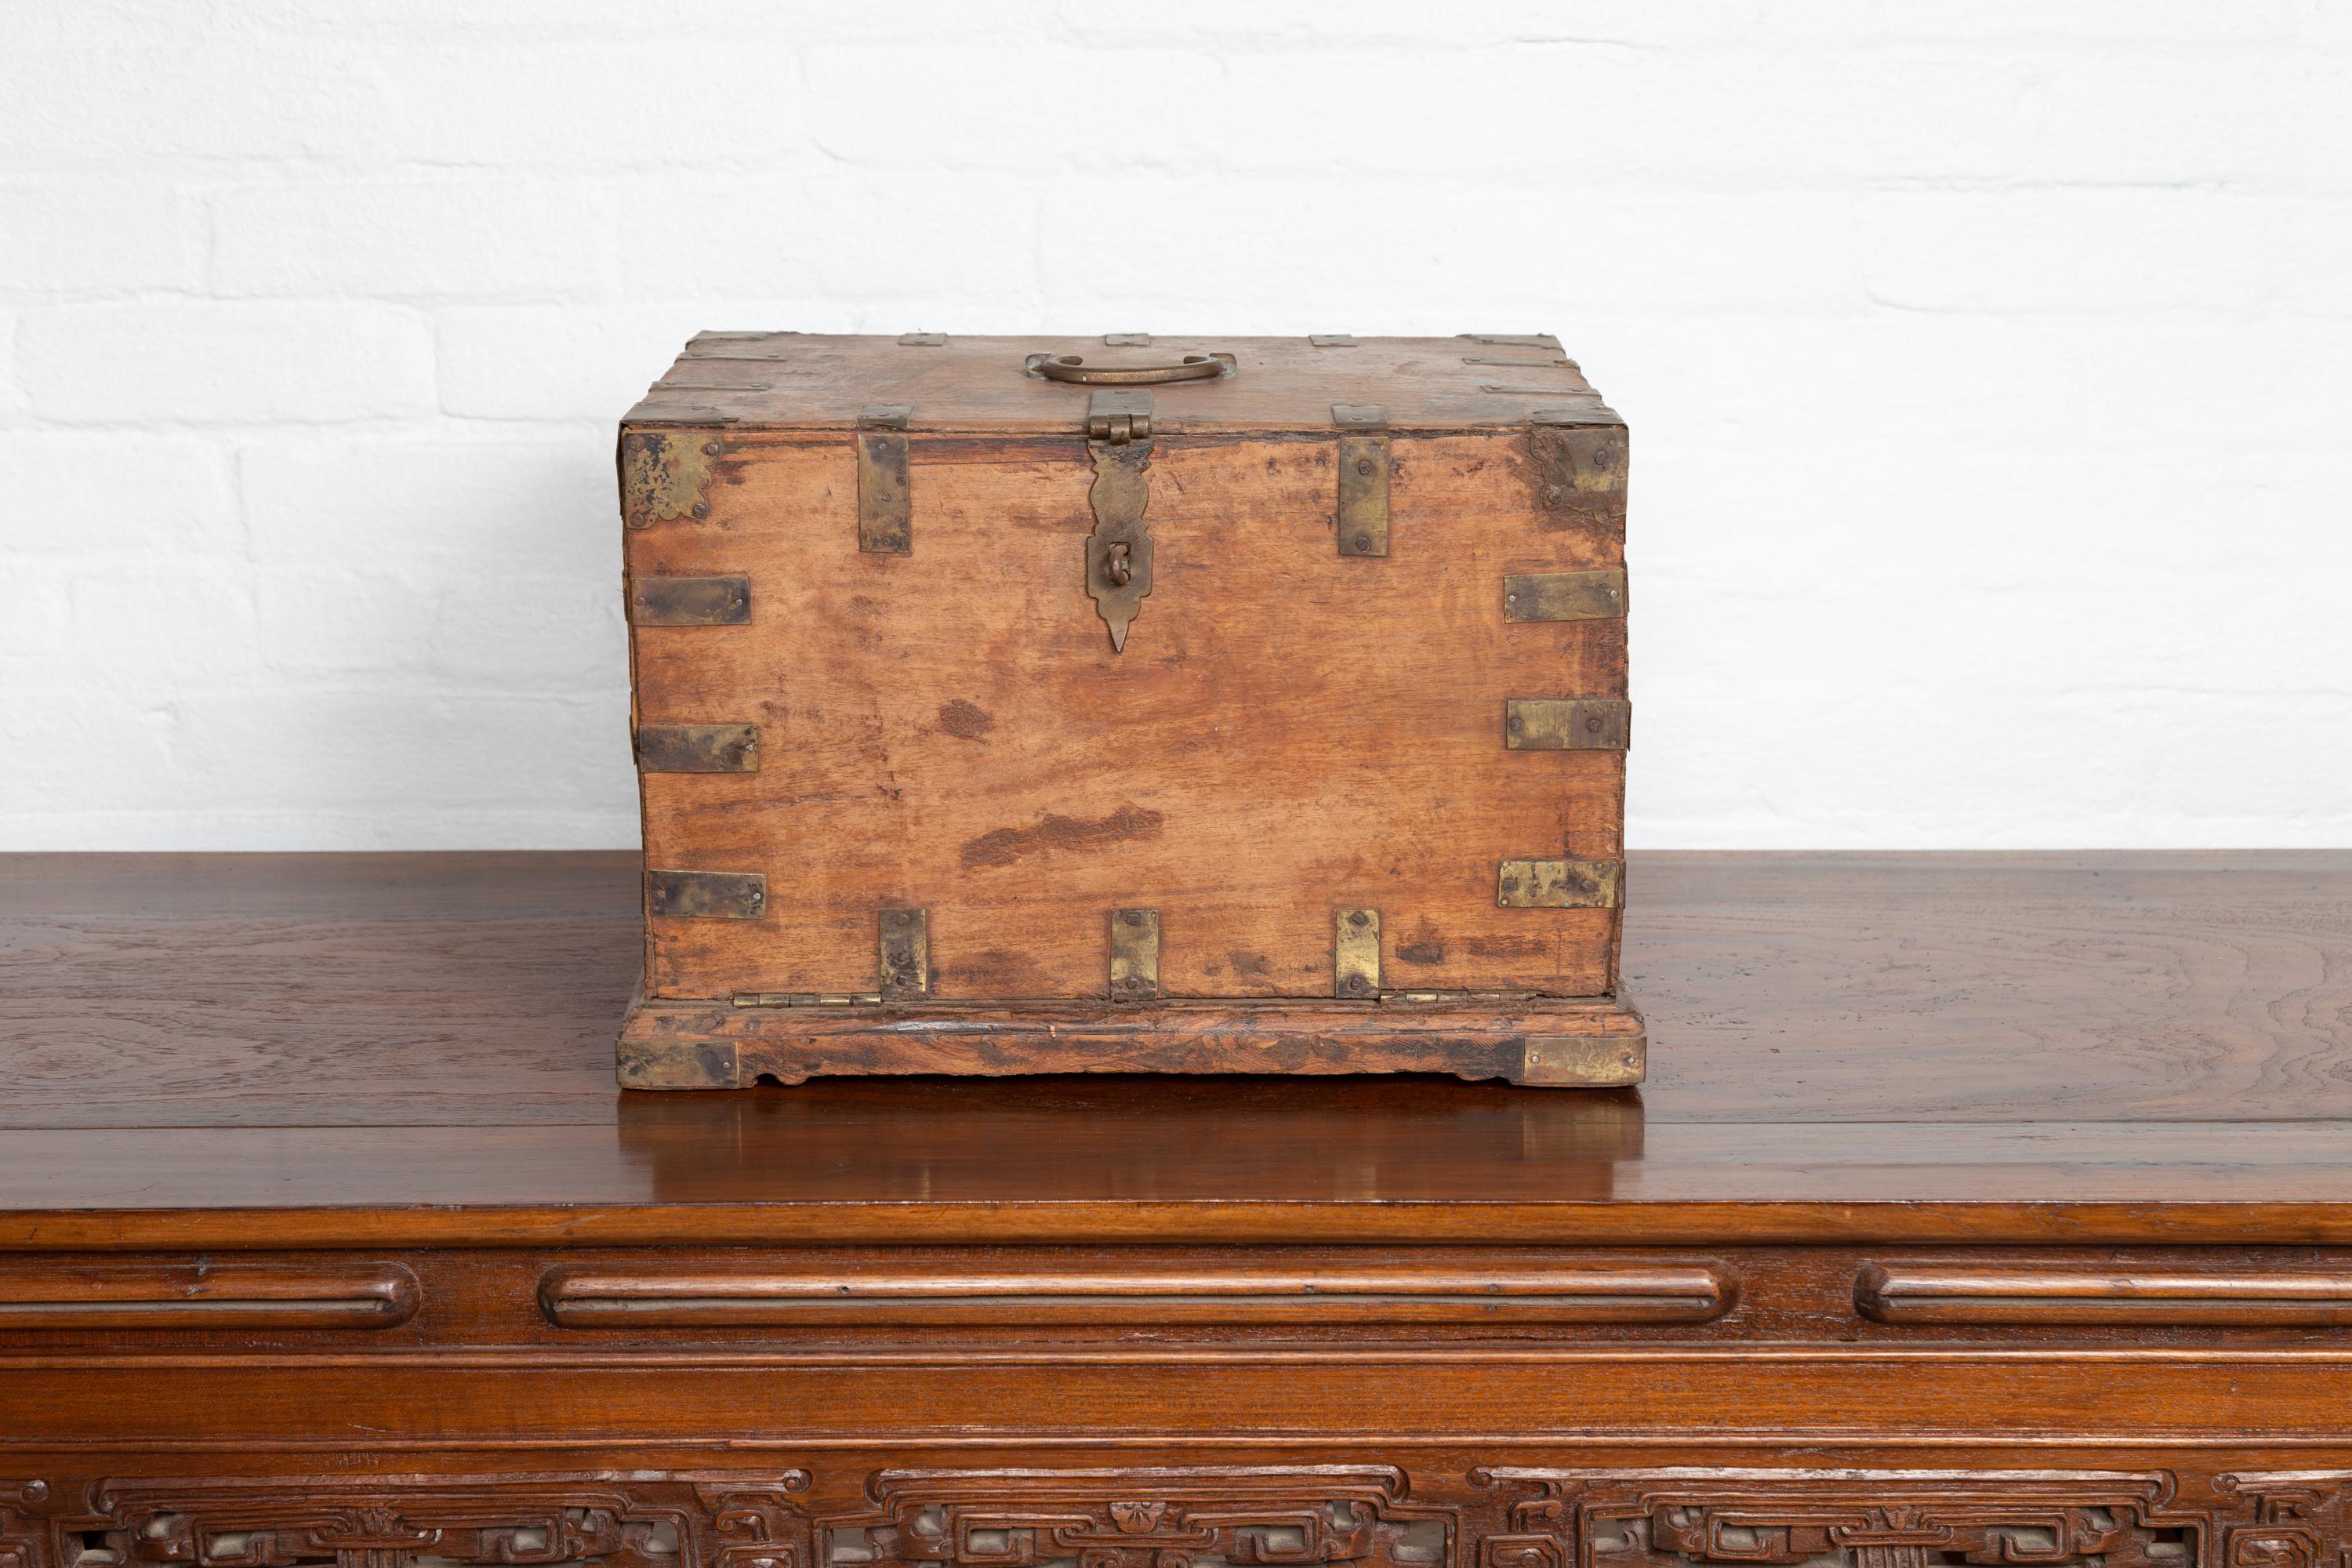 An antique Indian wooden jewelry box from the 19th century, with drop front and six hidden drawers. Born in India during the 19th century, this charming jewelry box features a nicely rustic appearance. Presenting a linear frame accented with brass